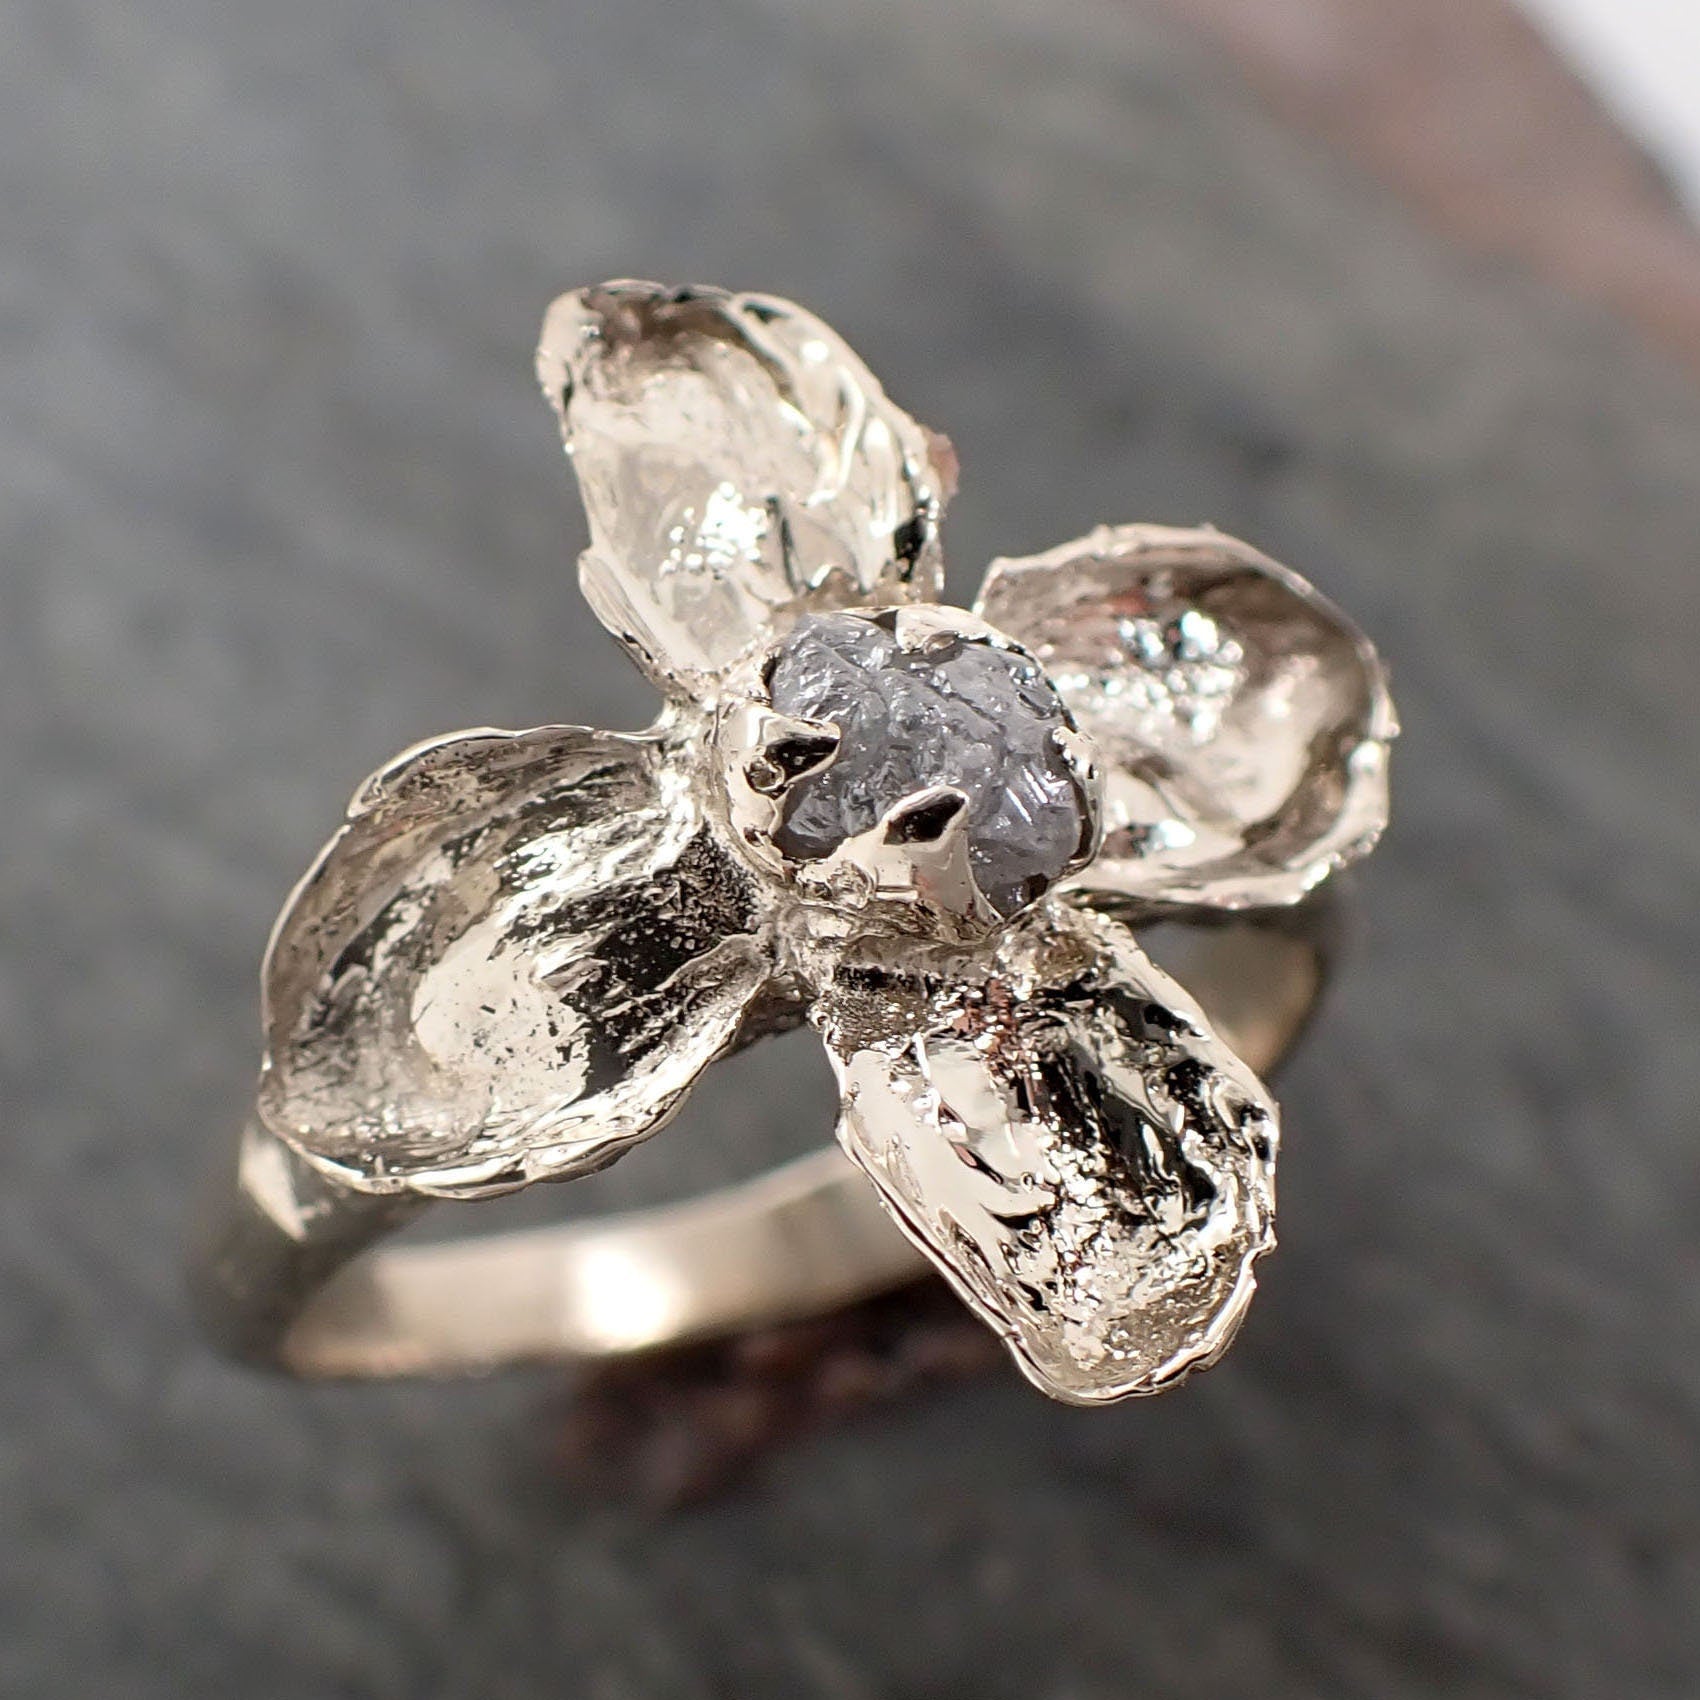 Real Flower and rough diamond 18k White gold wedding engagement ring Enchanted Garden Floral Ring byAngeline 2990